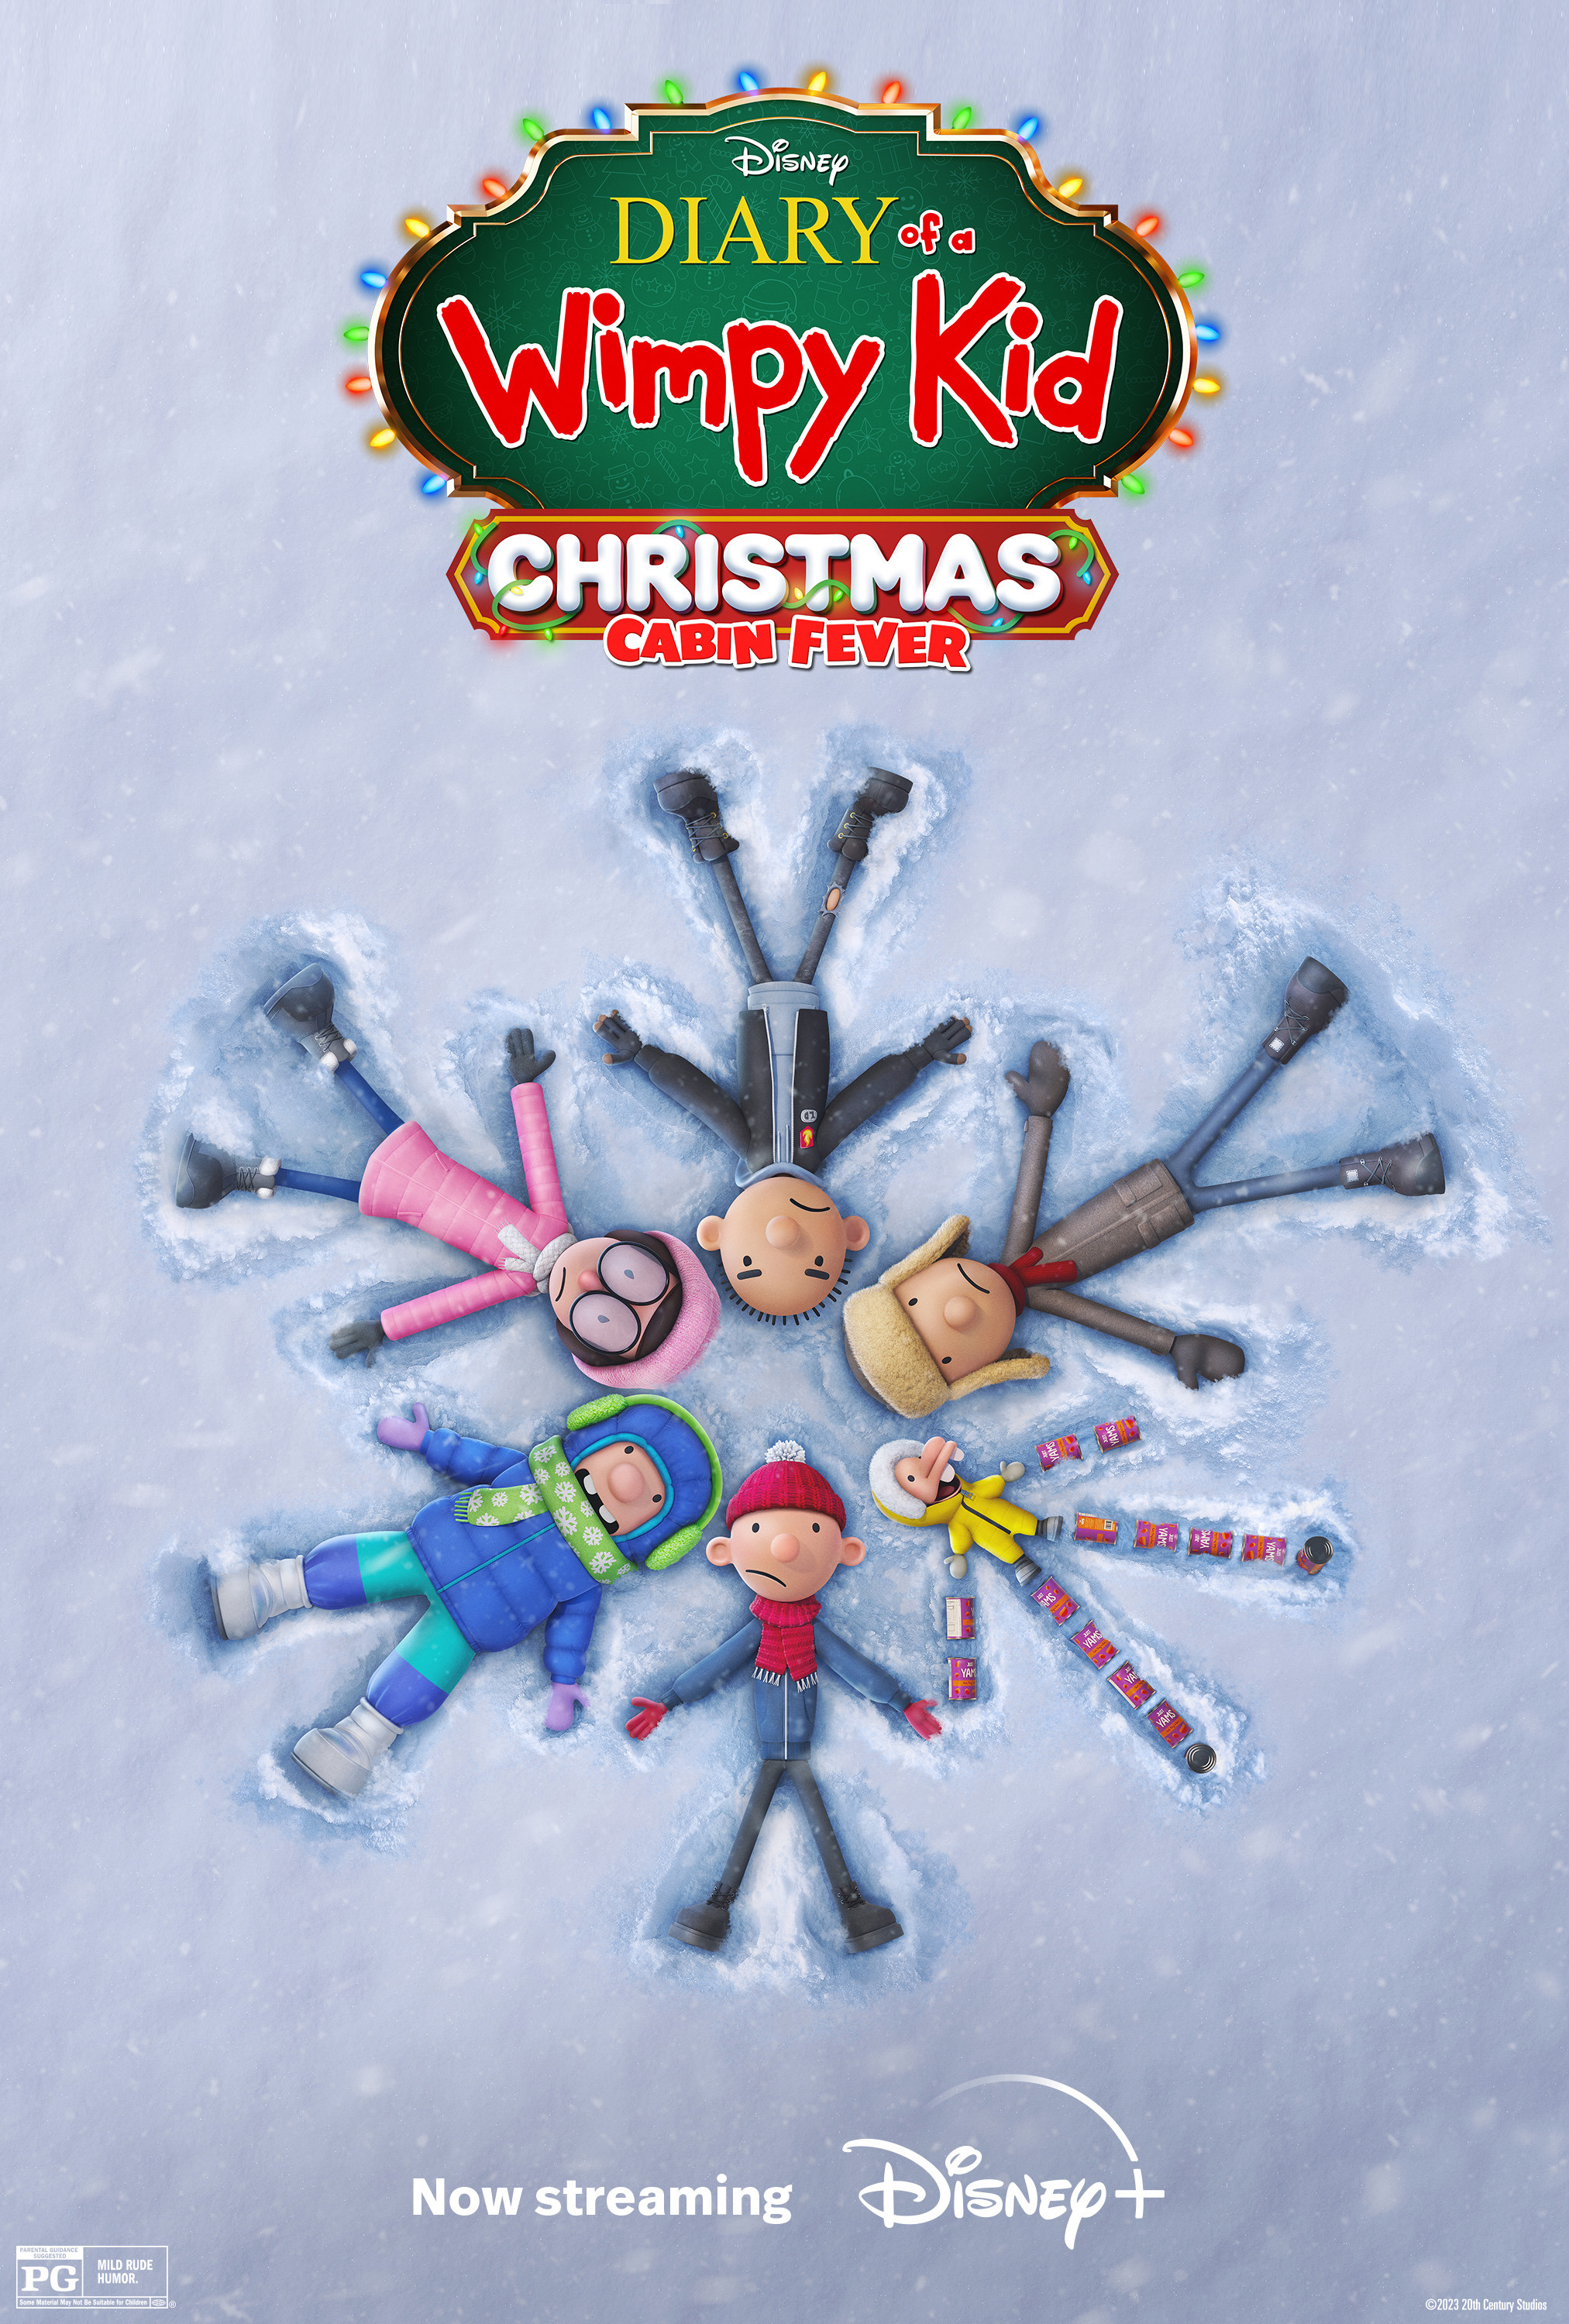 Mega Sized Movie Poster Image for Diary of a Wimpy Kid Christmas: Cabin Fever (#4 of 5)